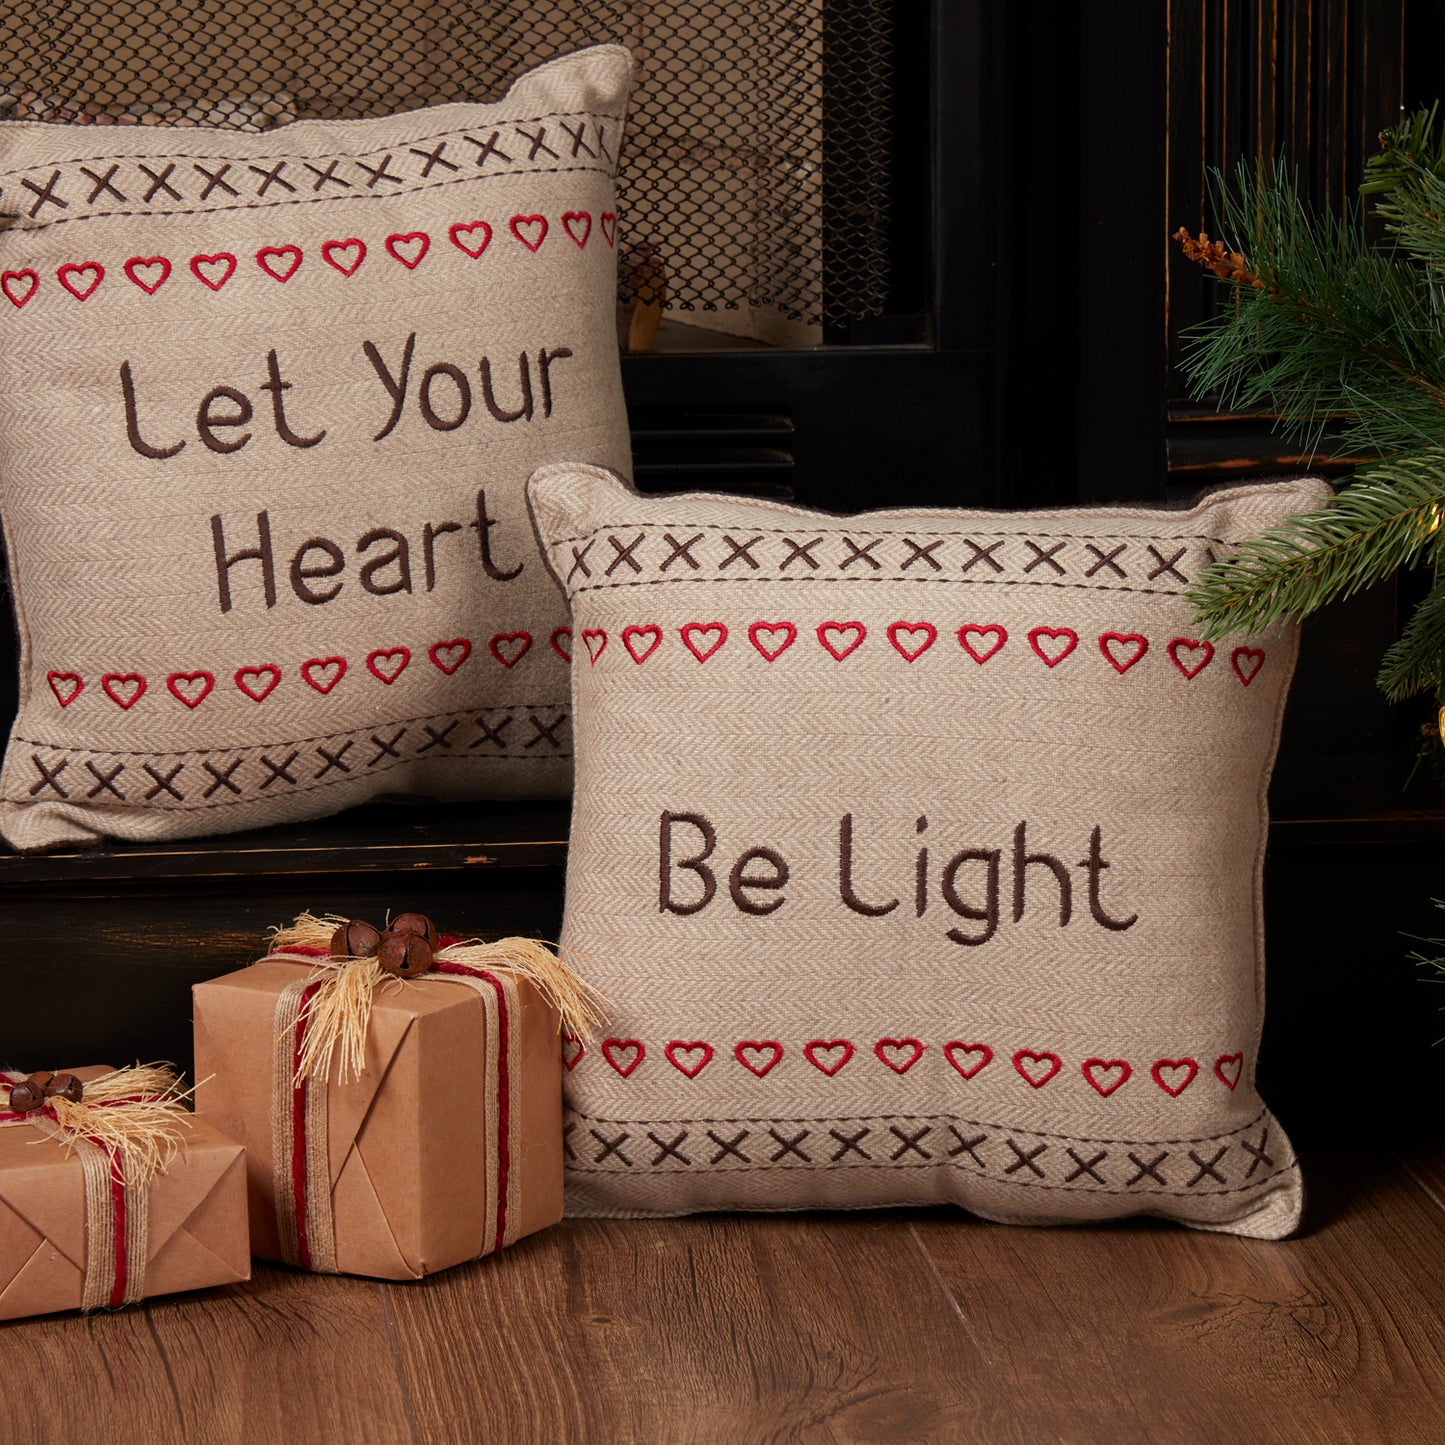 26637-Merry-Little-Christmas-Pillow-Let-Your-Heart-Set-of-2-12x12-image-1